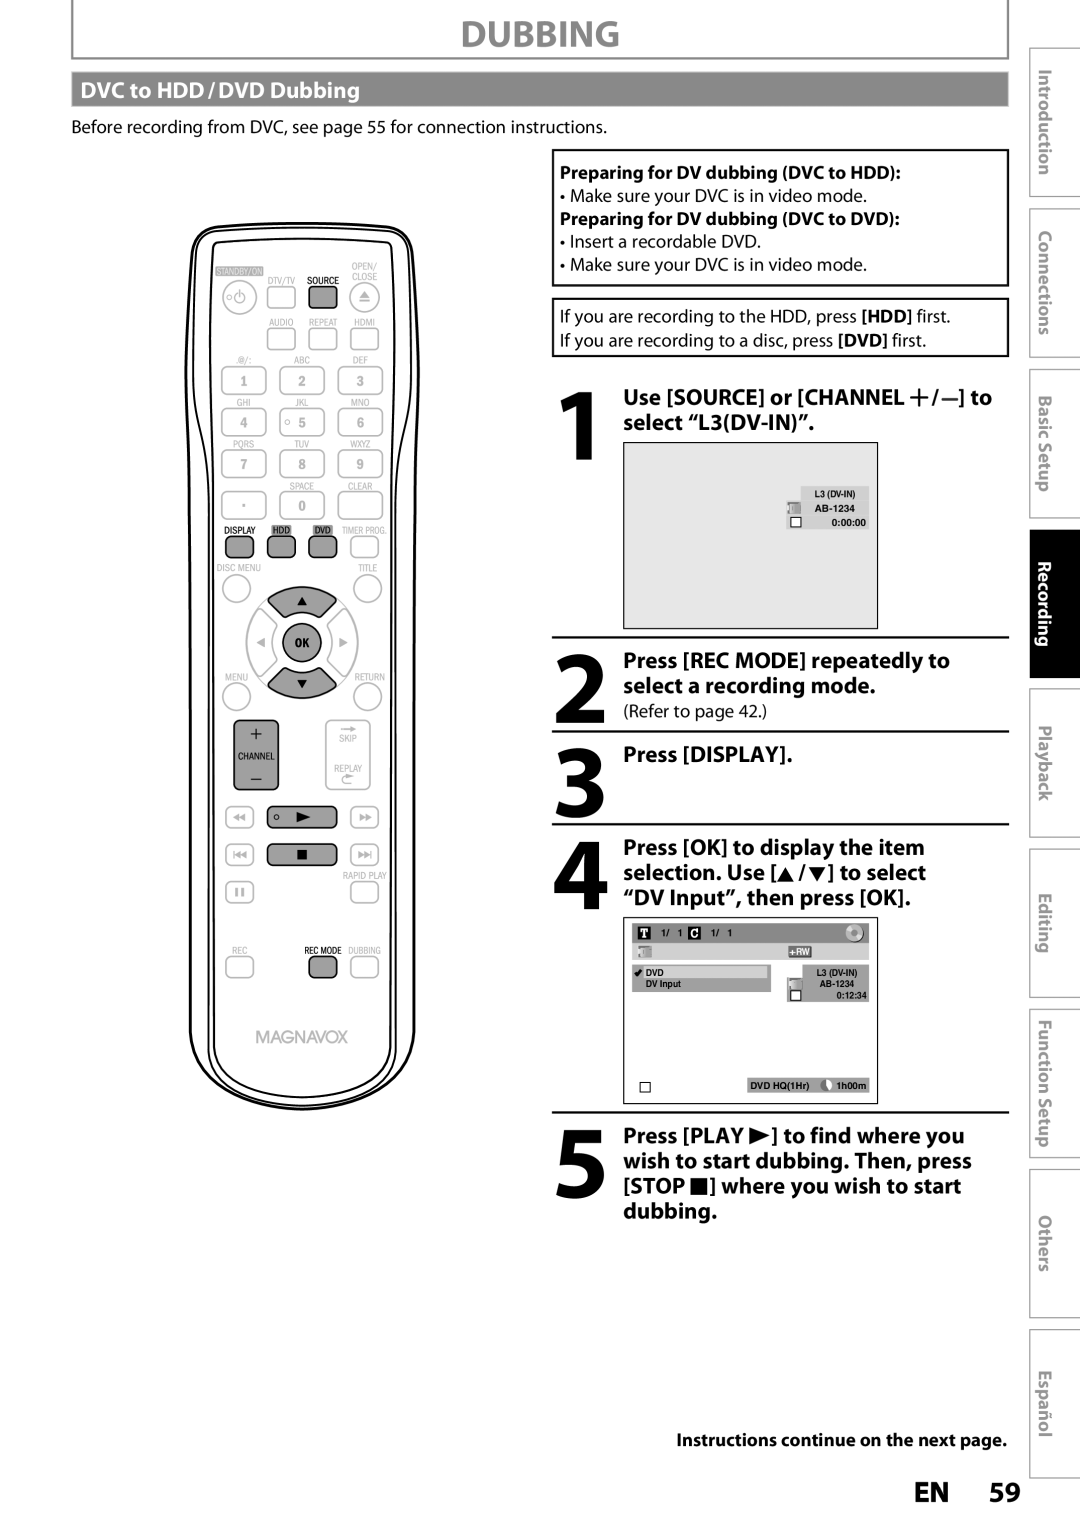 Magnavox MDR537H DVC to HDD / DVD Dubbing, Use SOURCE or CHANNEL / to, select “L3DV-IN”, Press PLAY B to find where you 